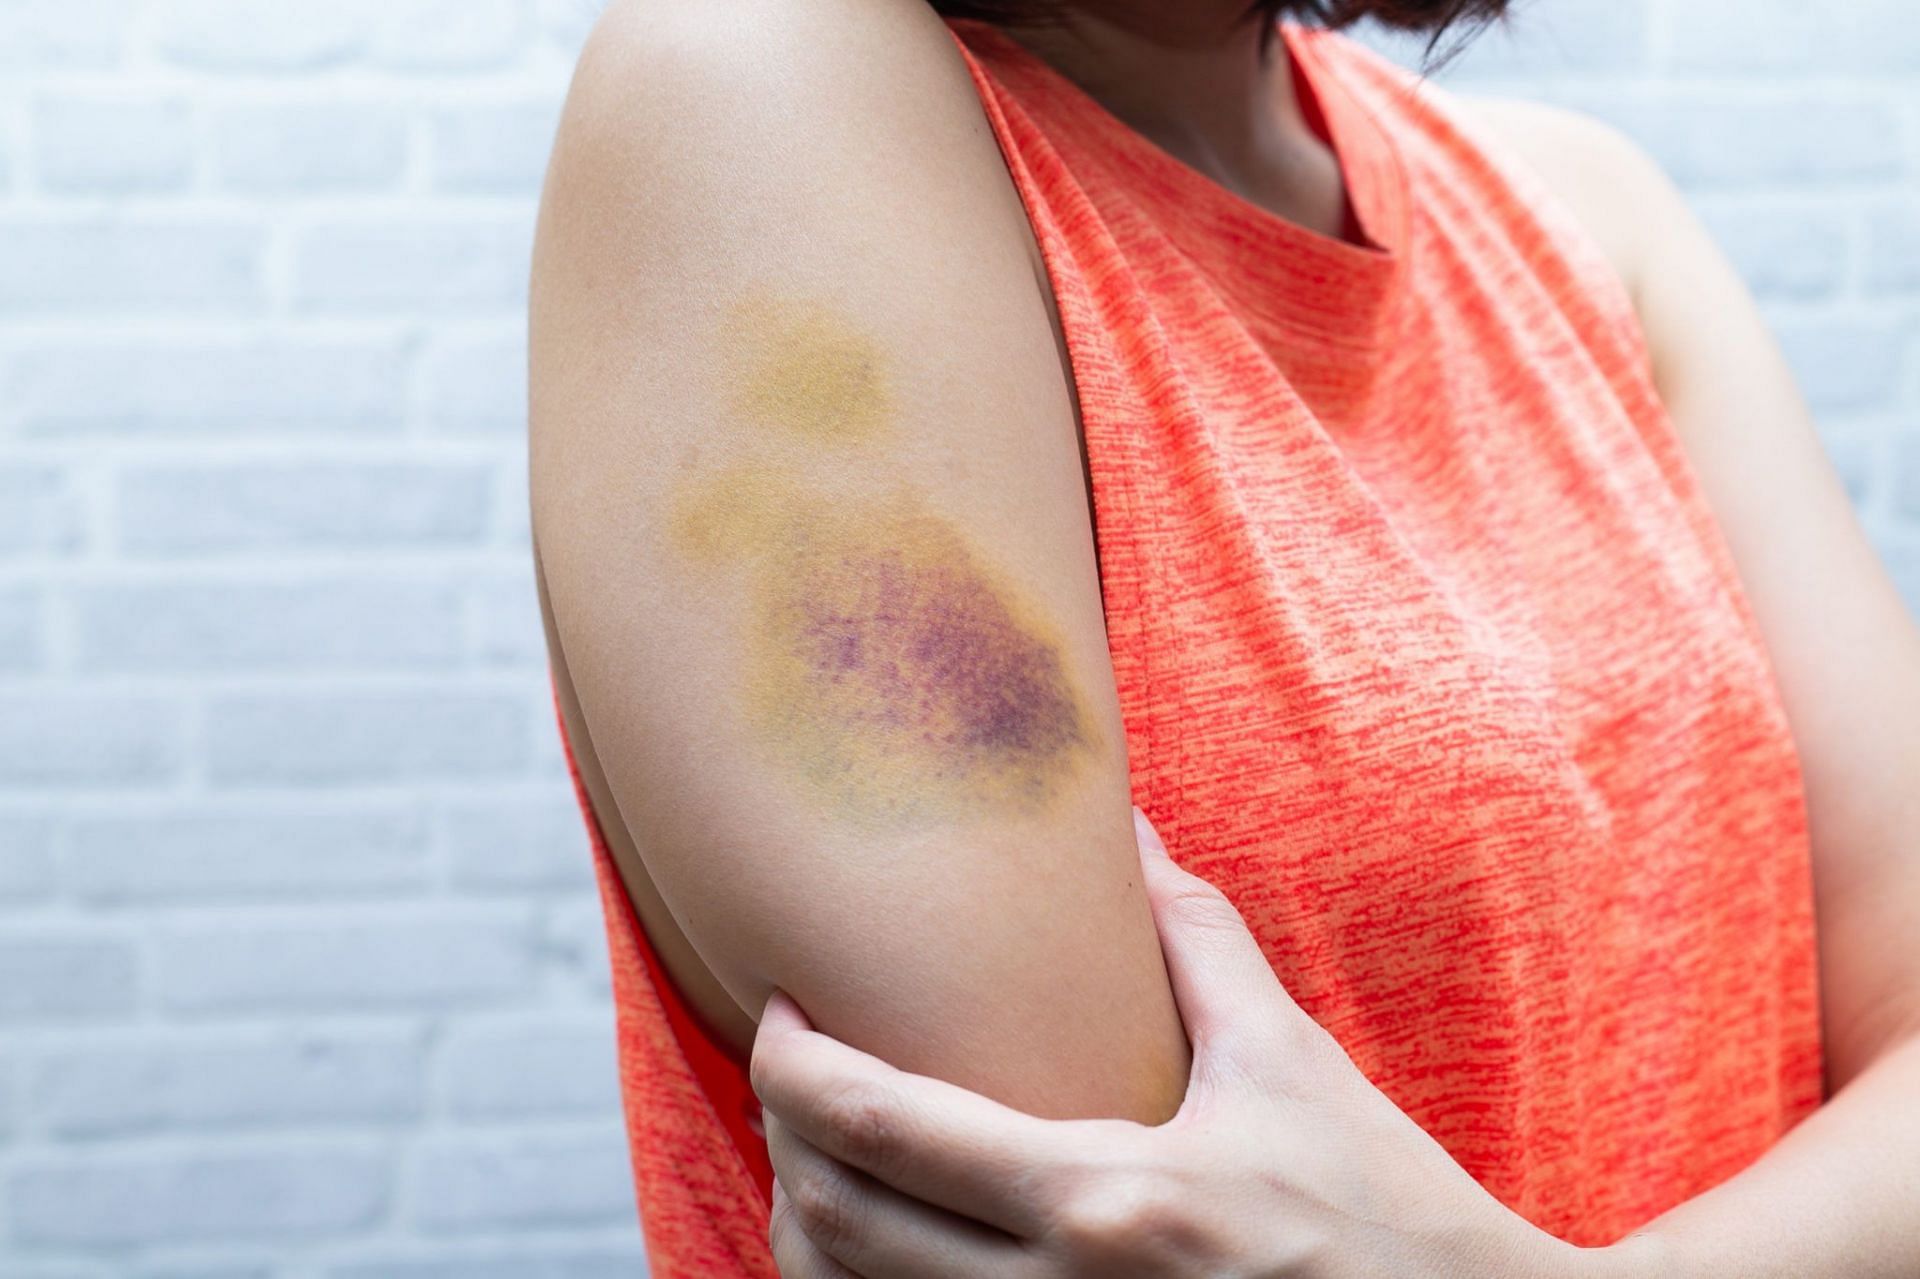 The development of yellow bruises during the initial stages can be attributed to the breakdown of hemoglobin. (Image via Shutterstock)